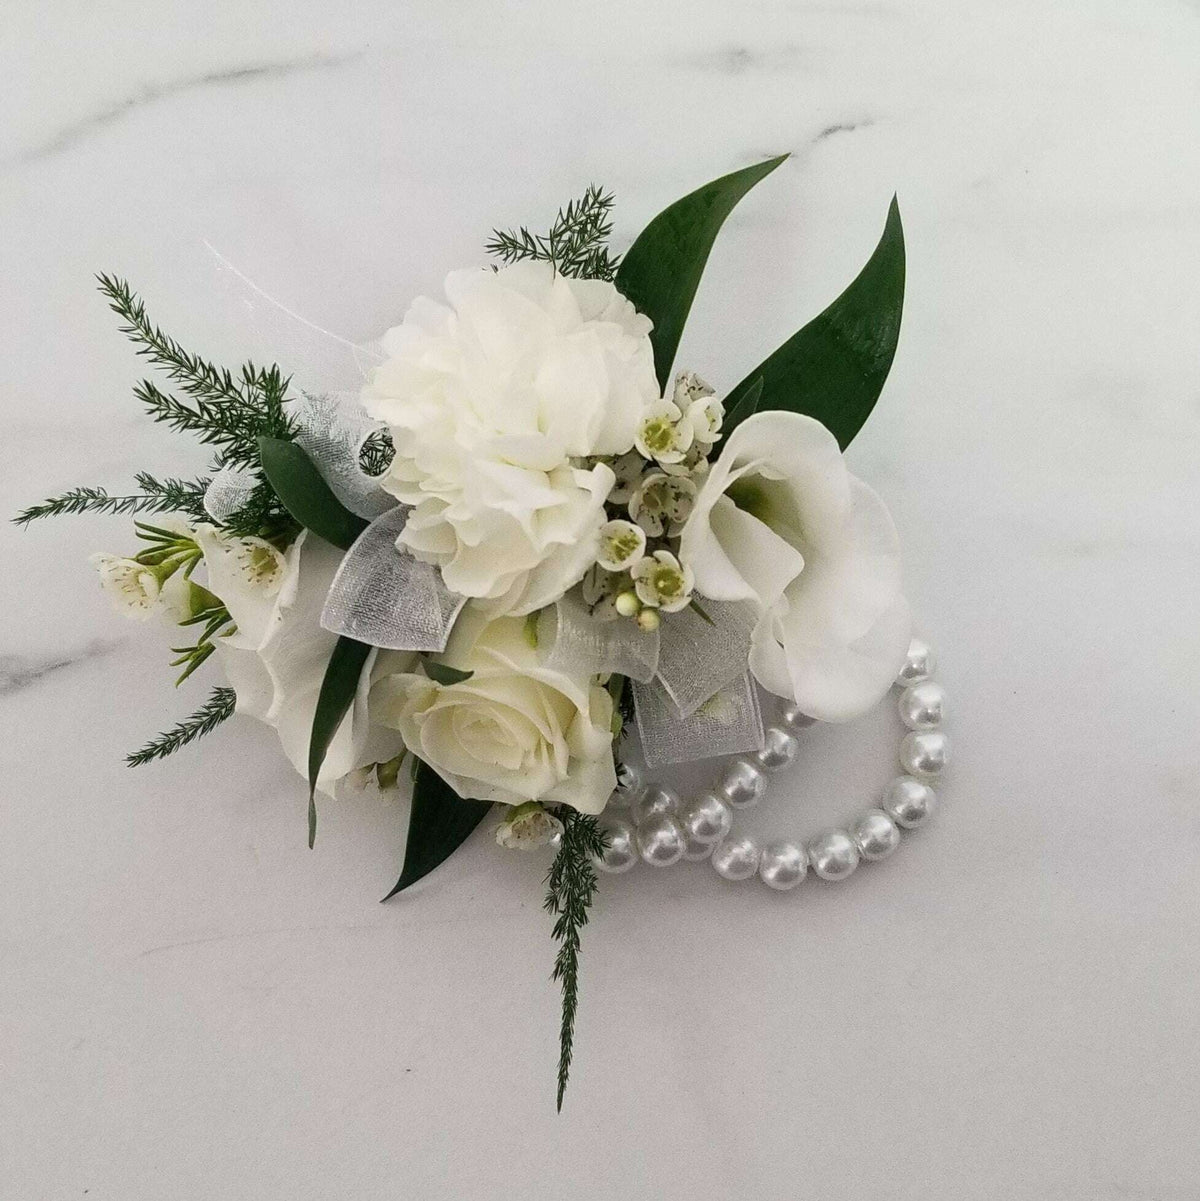 Mixed Blooms Corsage/Boutonniere_Small [3 Blooms] / White / Yes Glam_Flower Arrangement_The Floral Fixx_The Floral Fixx